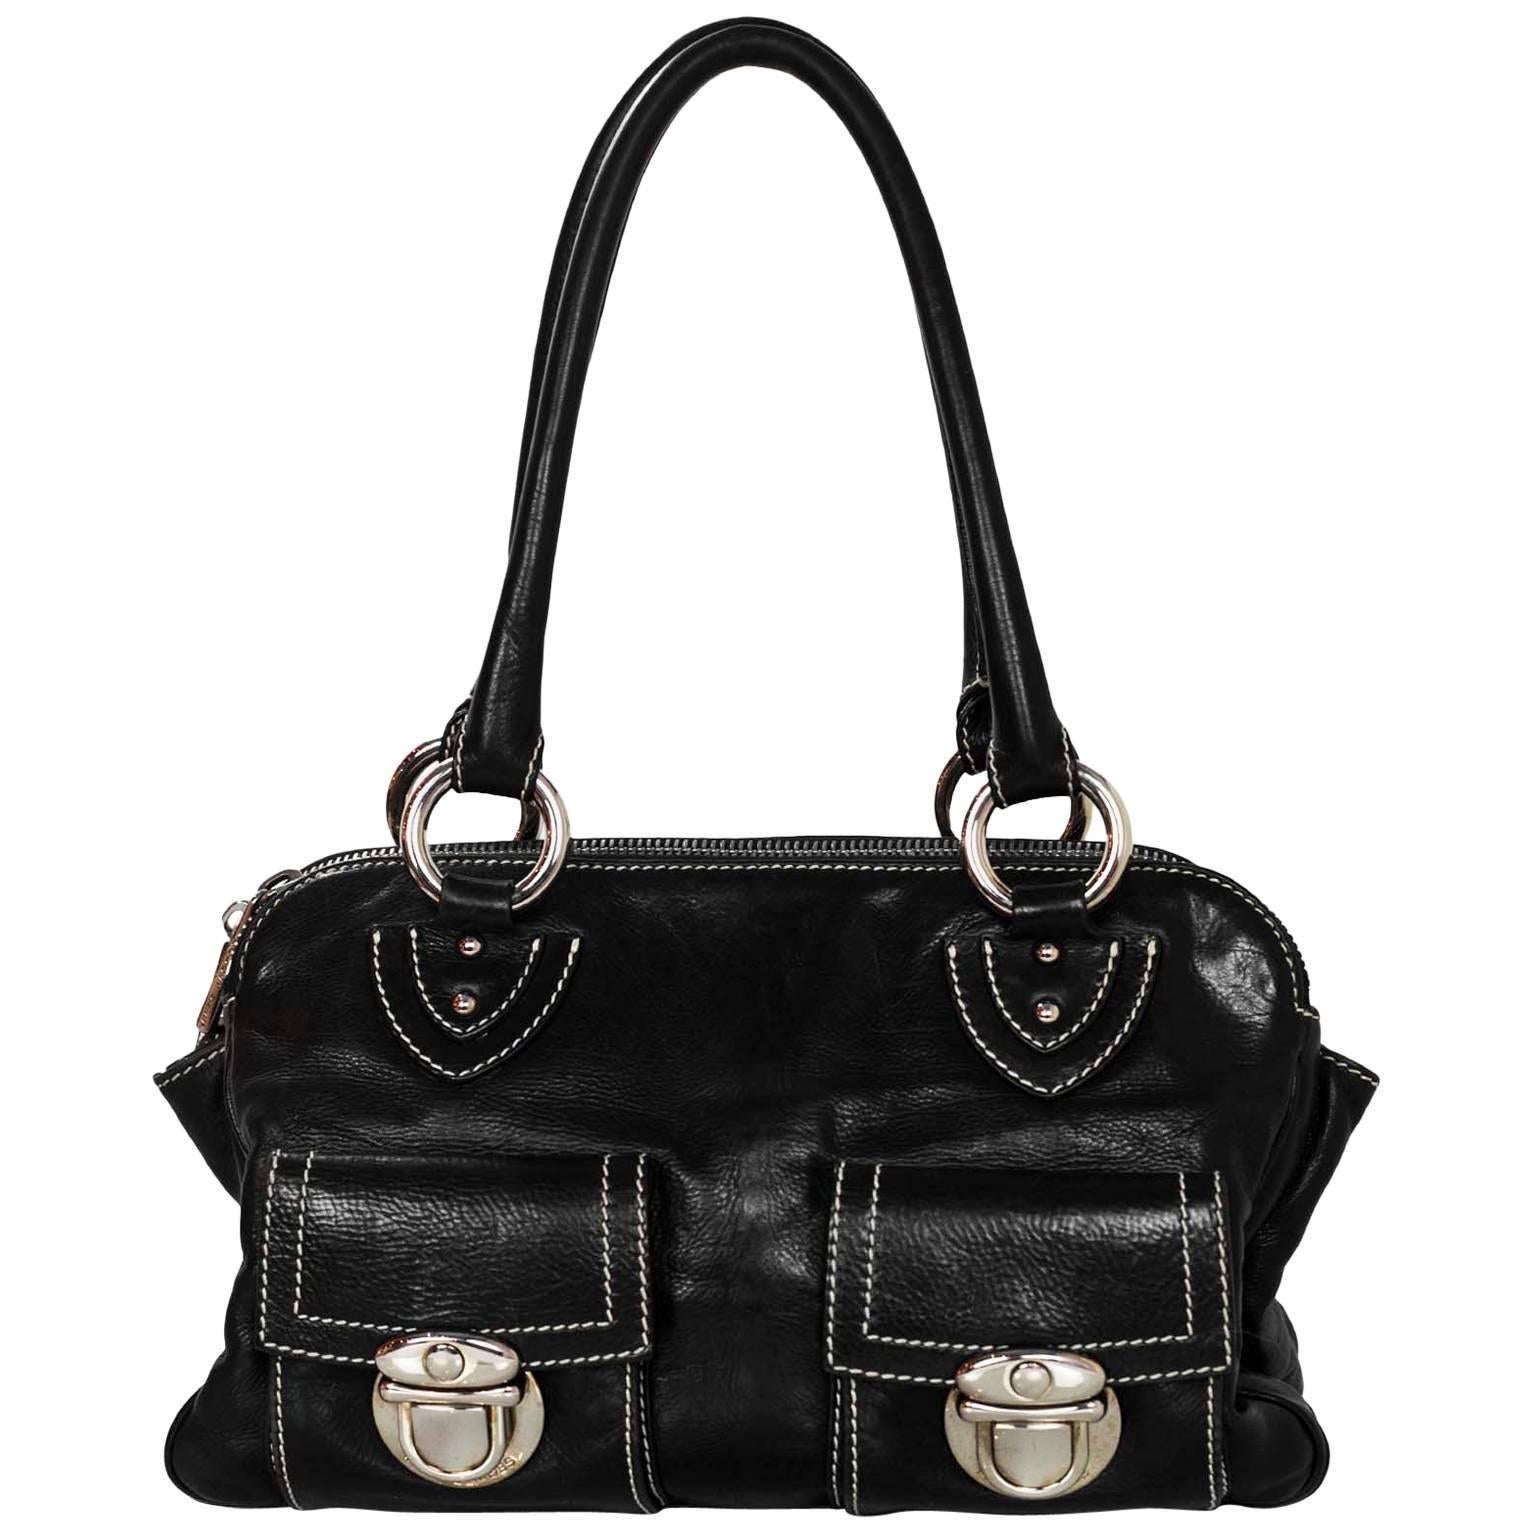 Marc Jacobs Black Leather Blake Bag with Dust Bag